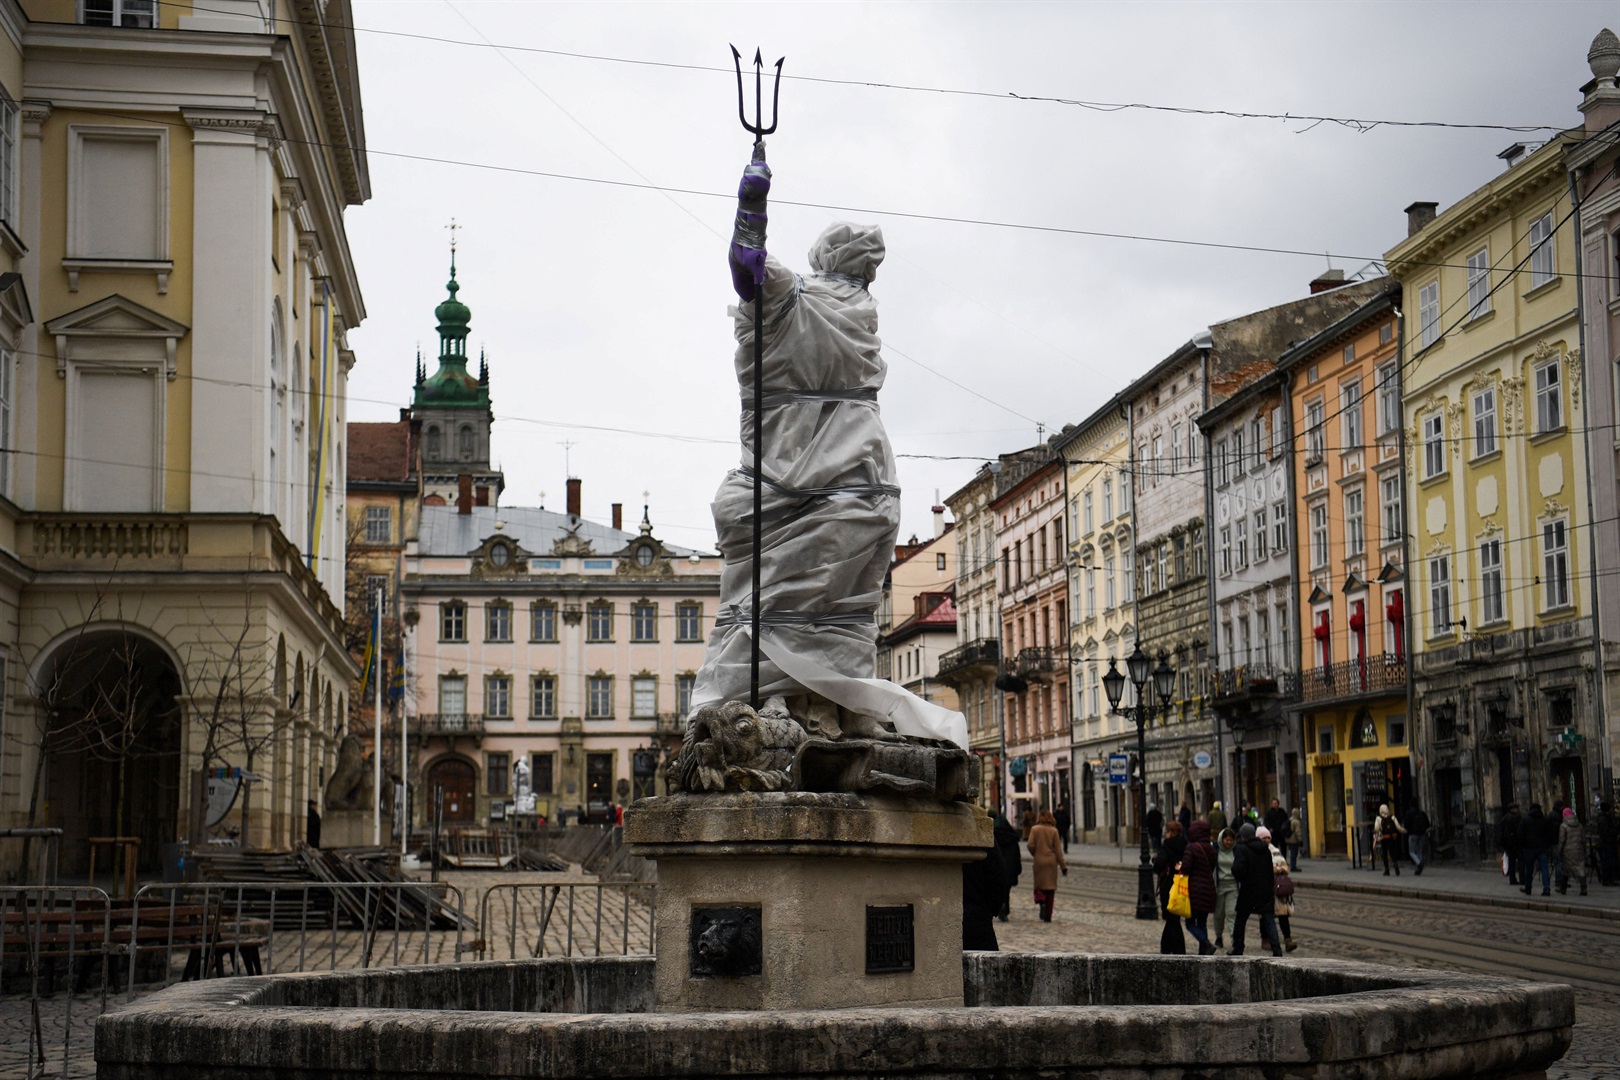 A statue outside the Latin Cathedral in Lviv, western Ukraine, is wrapped up to protect it from potential damage. DANIEL LEAL/AFP via Getty Images